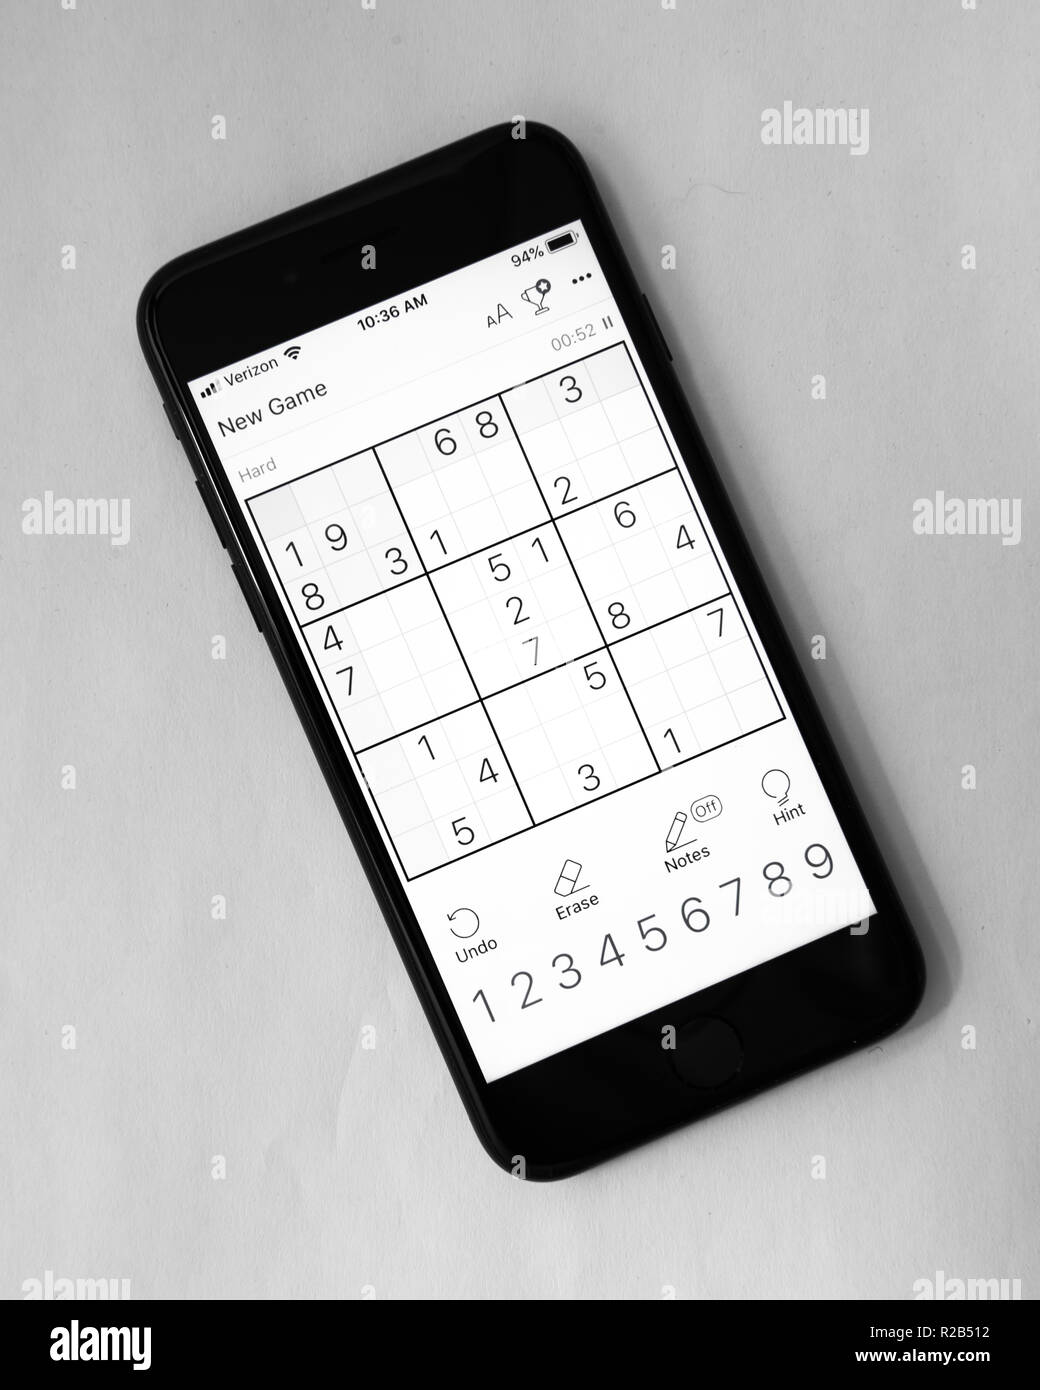 A black iPhone 7 with the screen showing a hard level Sudoku game. Stock Photo